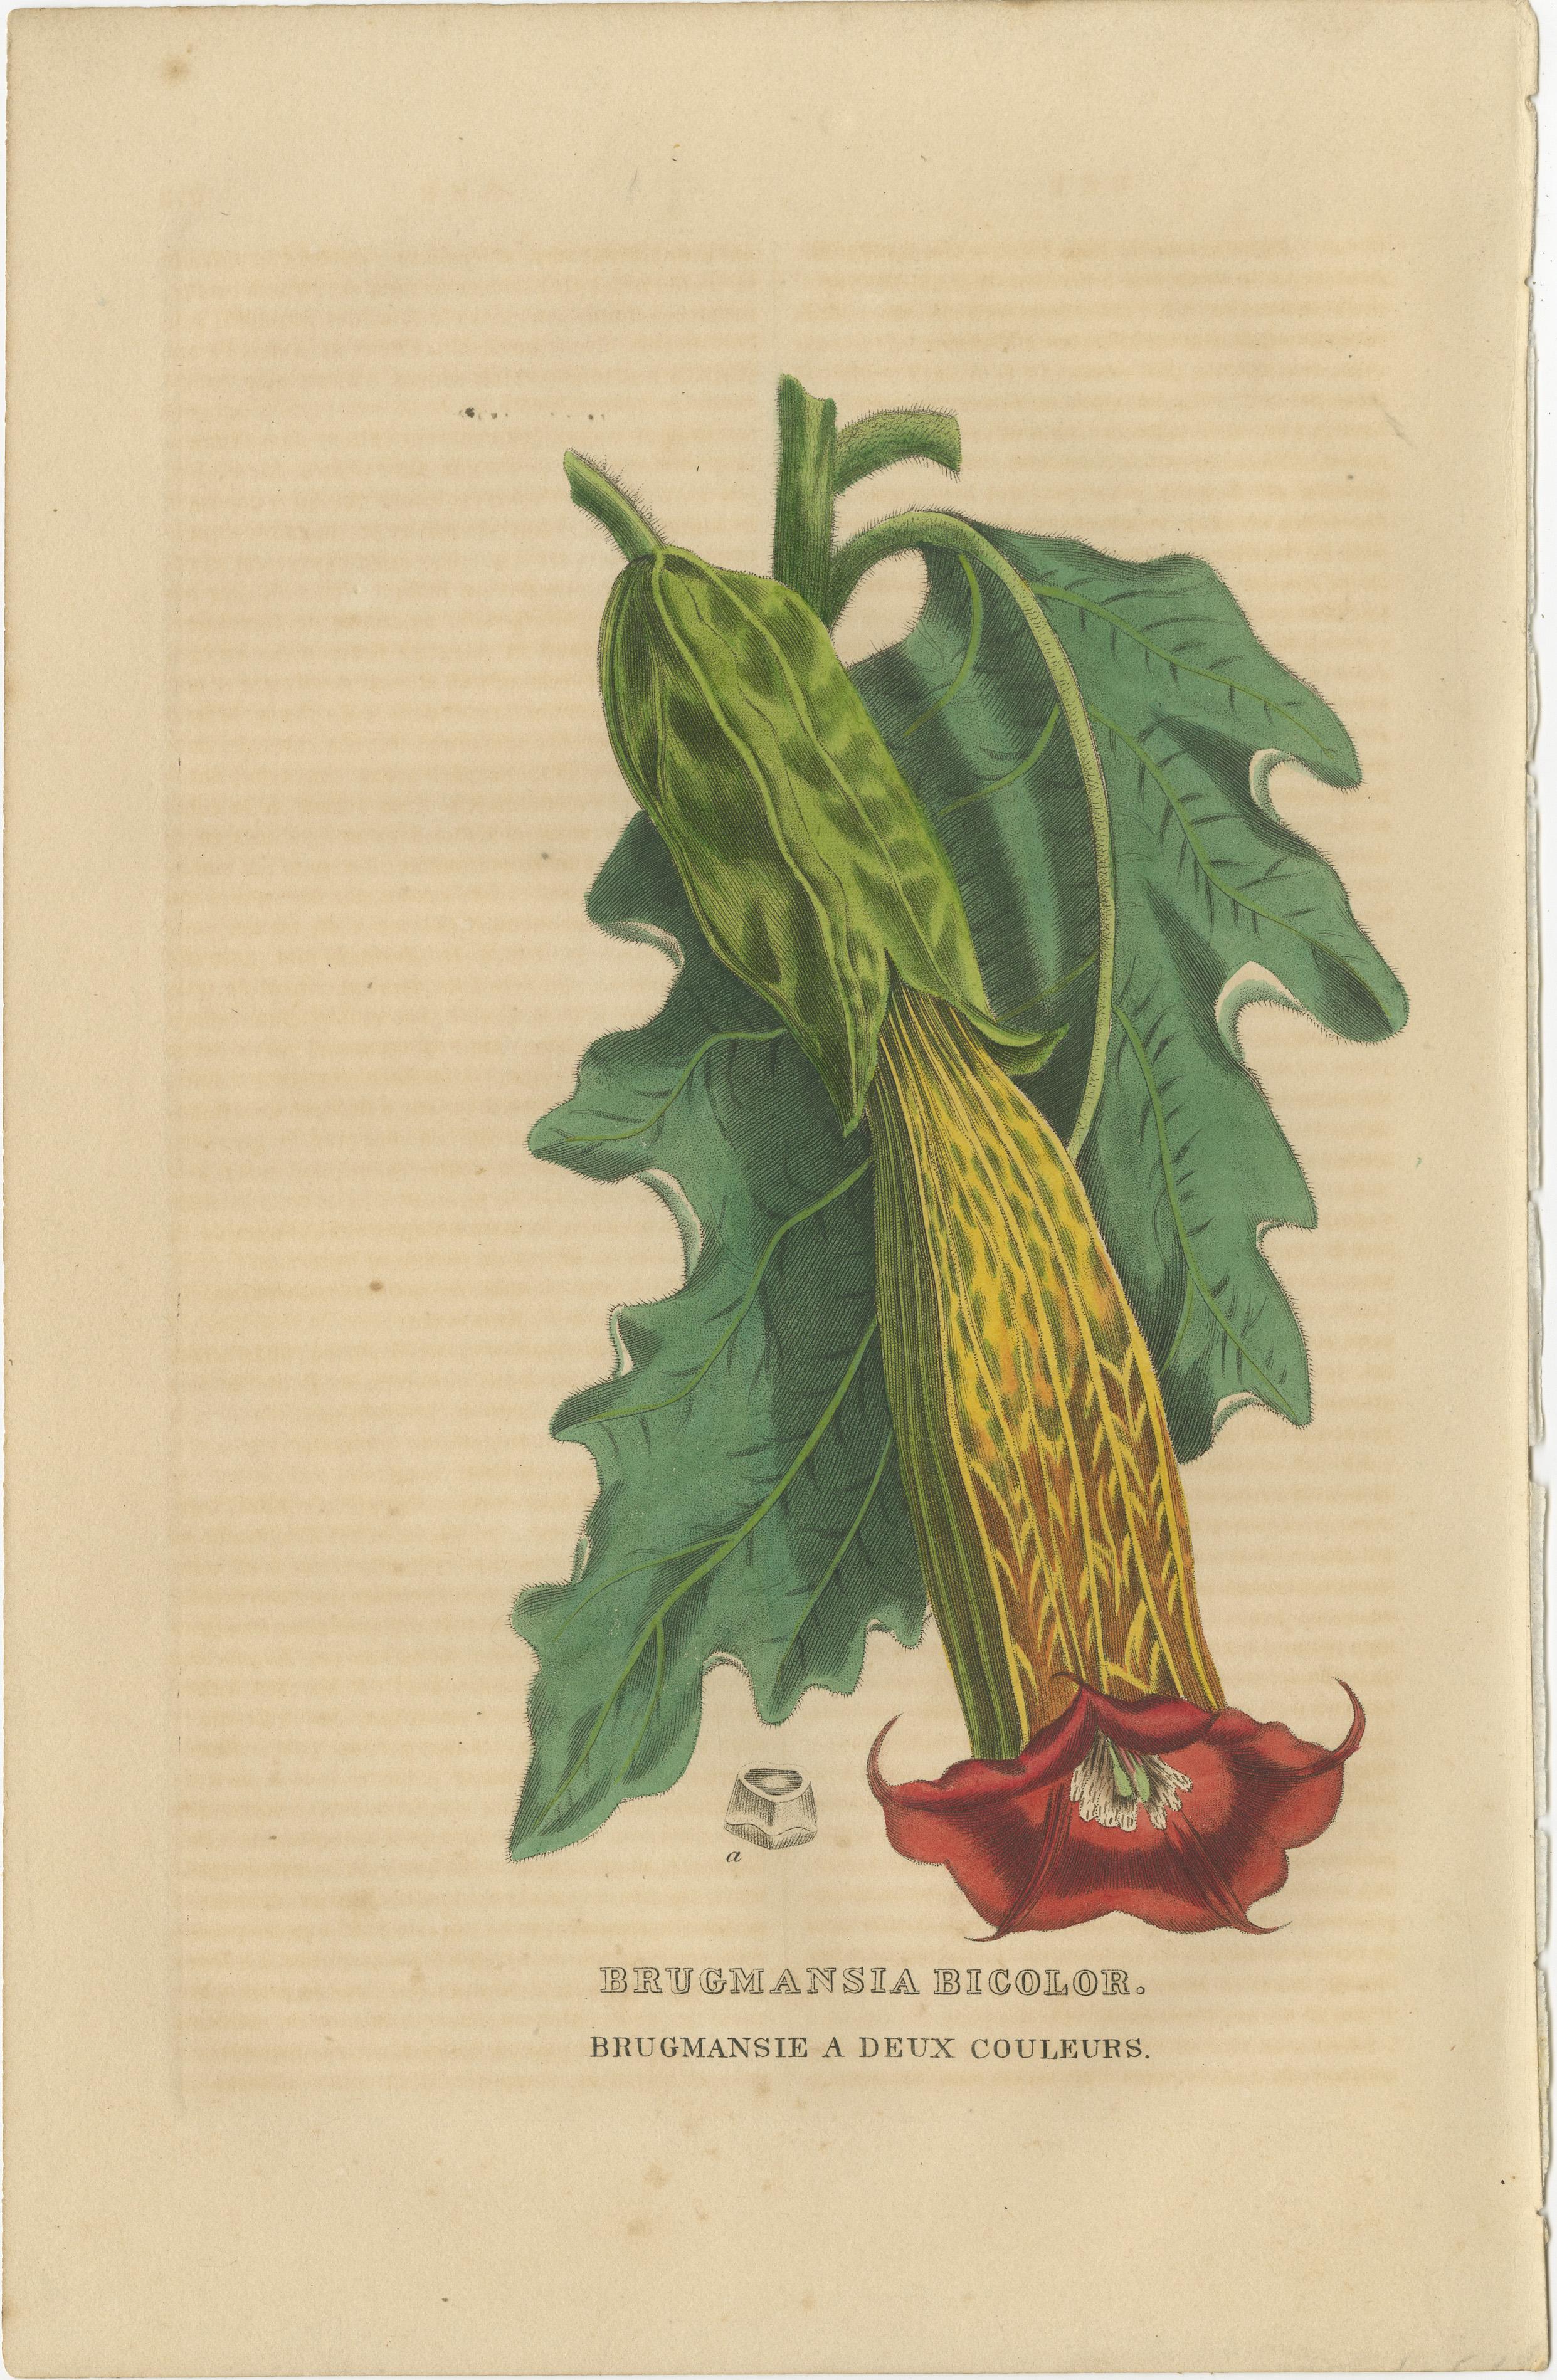 This image is a beautiful collage of antique hand-colored botanical engravings from 1845, each showcasing a different plant species with exceptional detail and vibrant colors. The engravings represent the following plants:

1. 